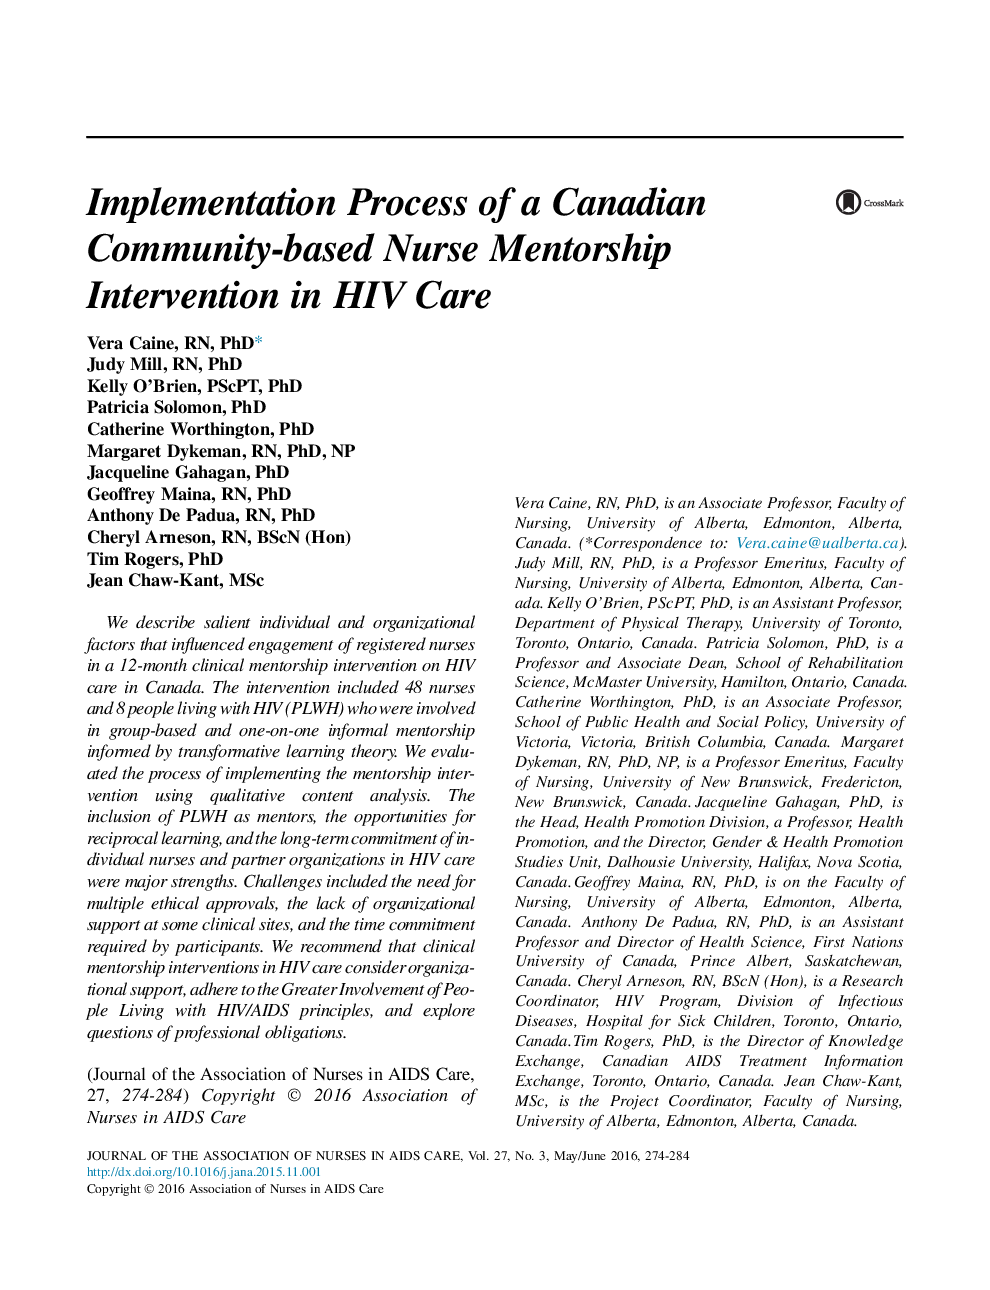 FeatureImplementation Process of a Canadian Community-based Nurse Mentorship Intervention in HIV Care